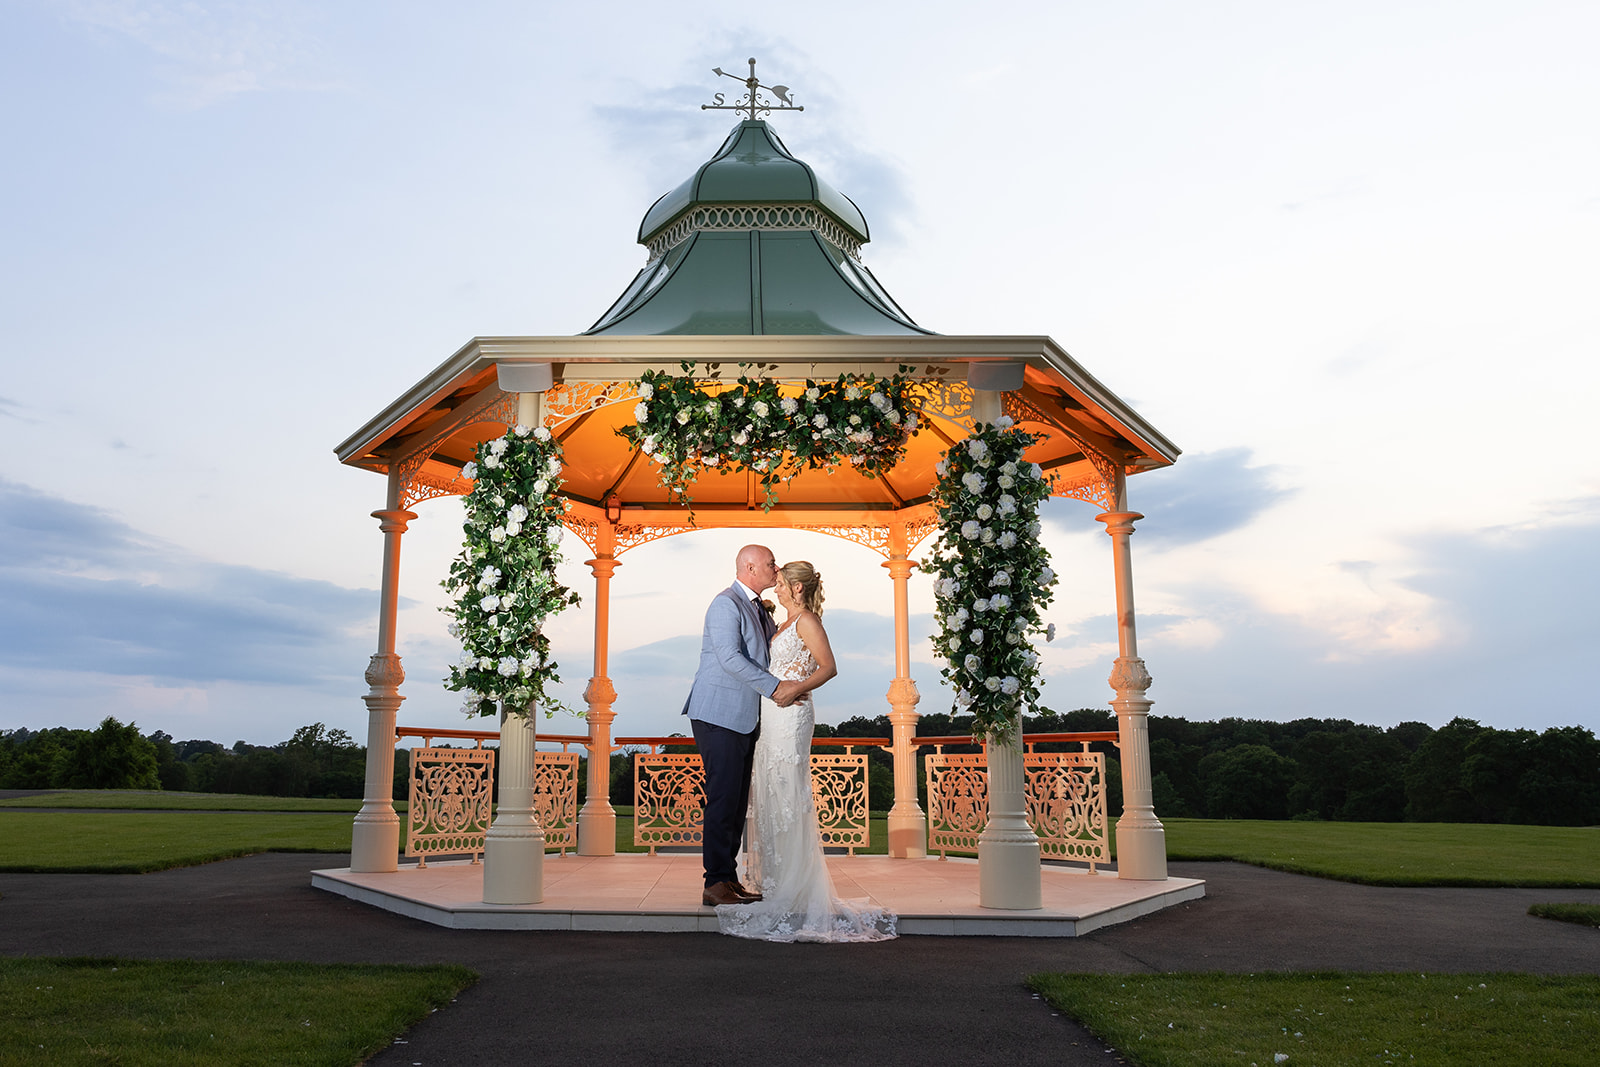 Couple kissing in decorated gazebo at Carden Park in the evening